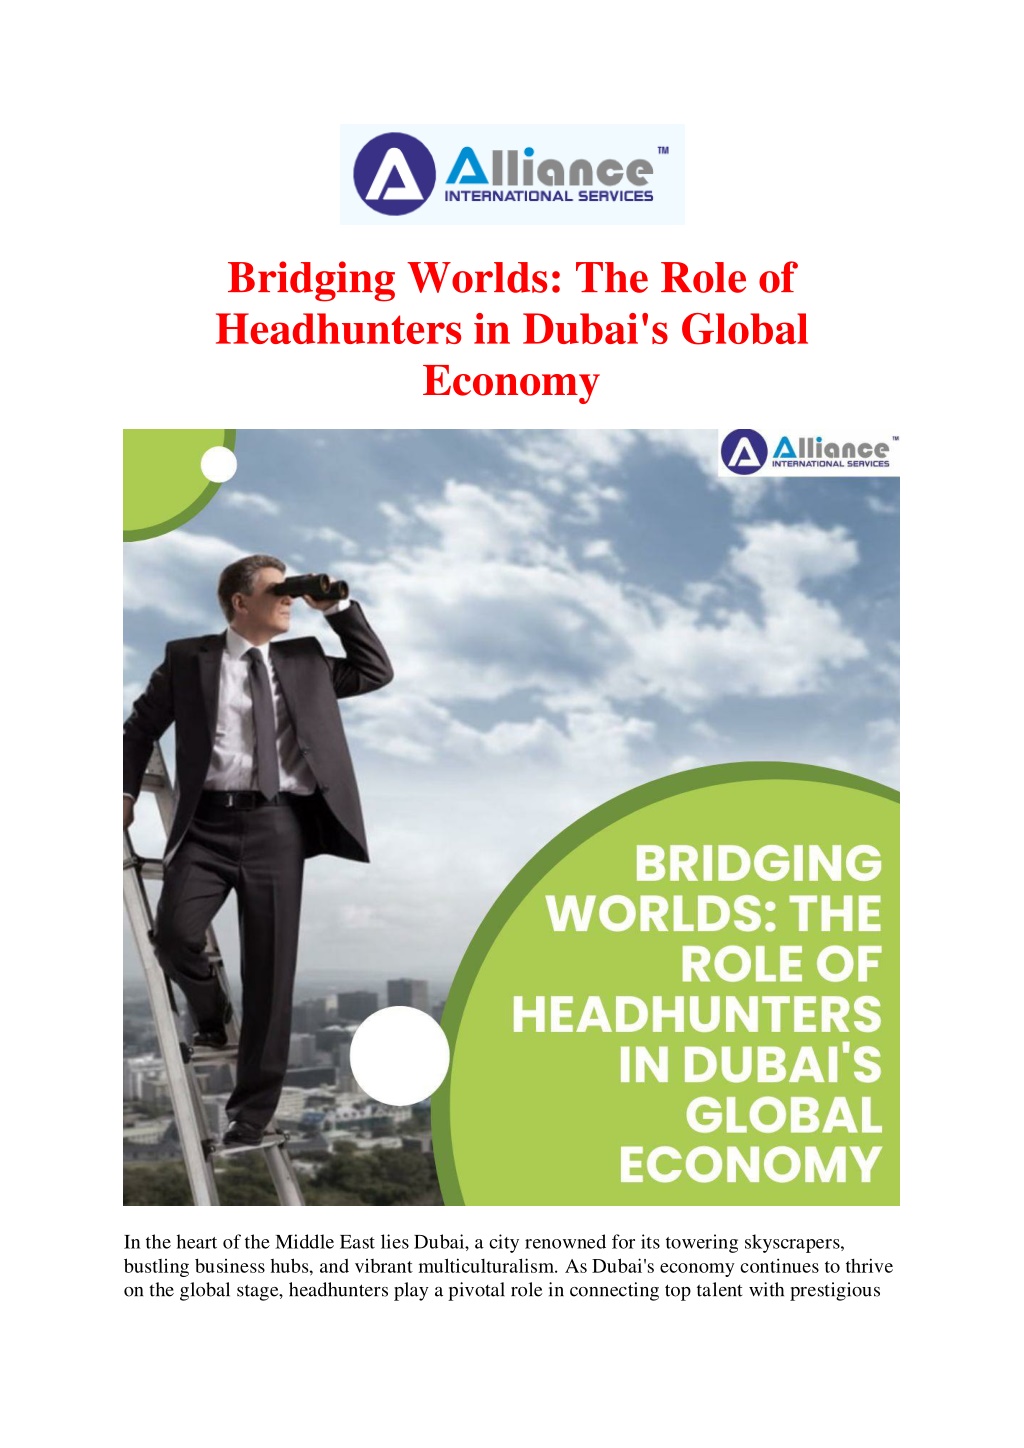 bridging worlds the role of headhunters in dubai l.w